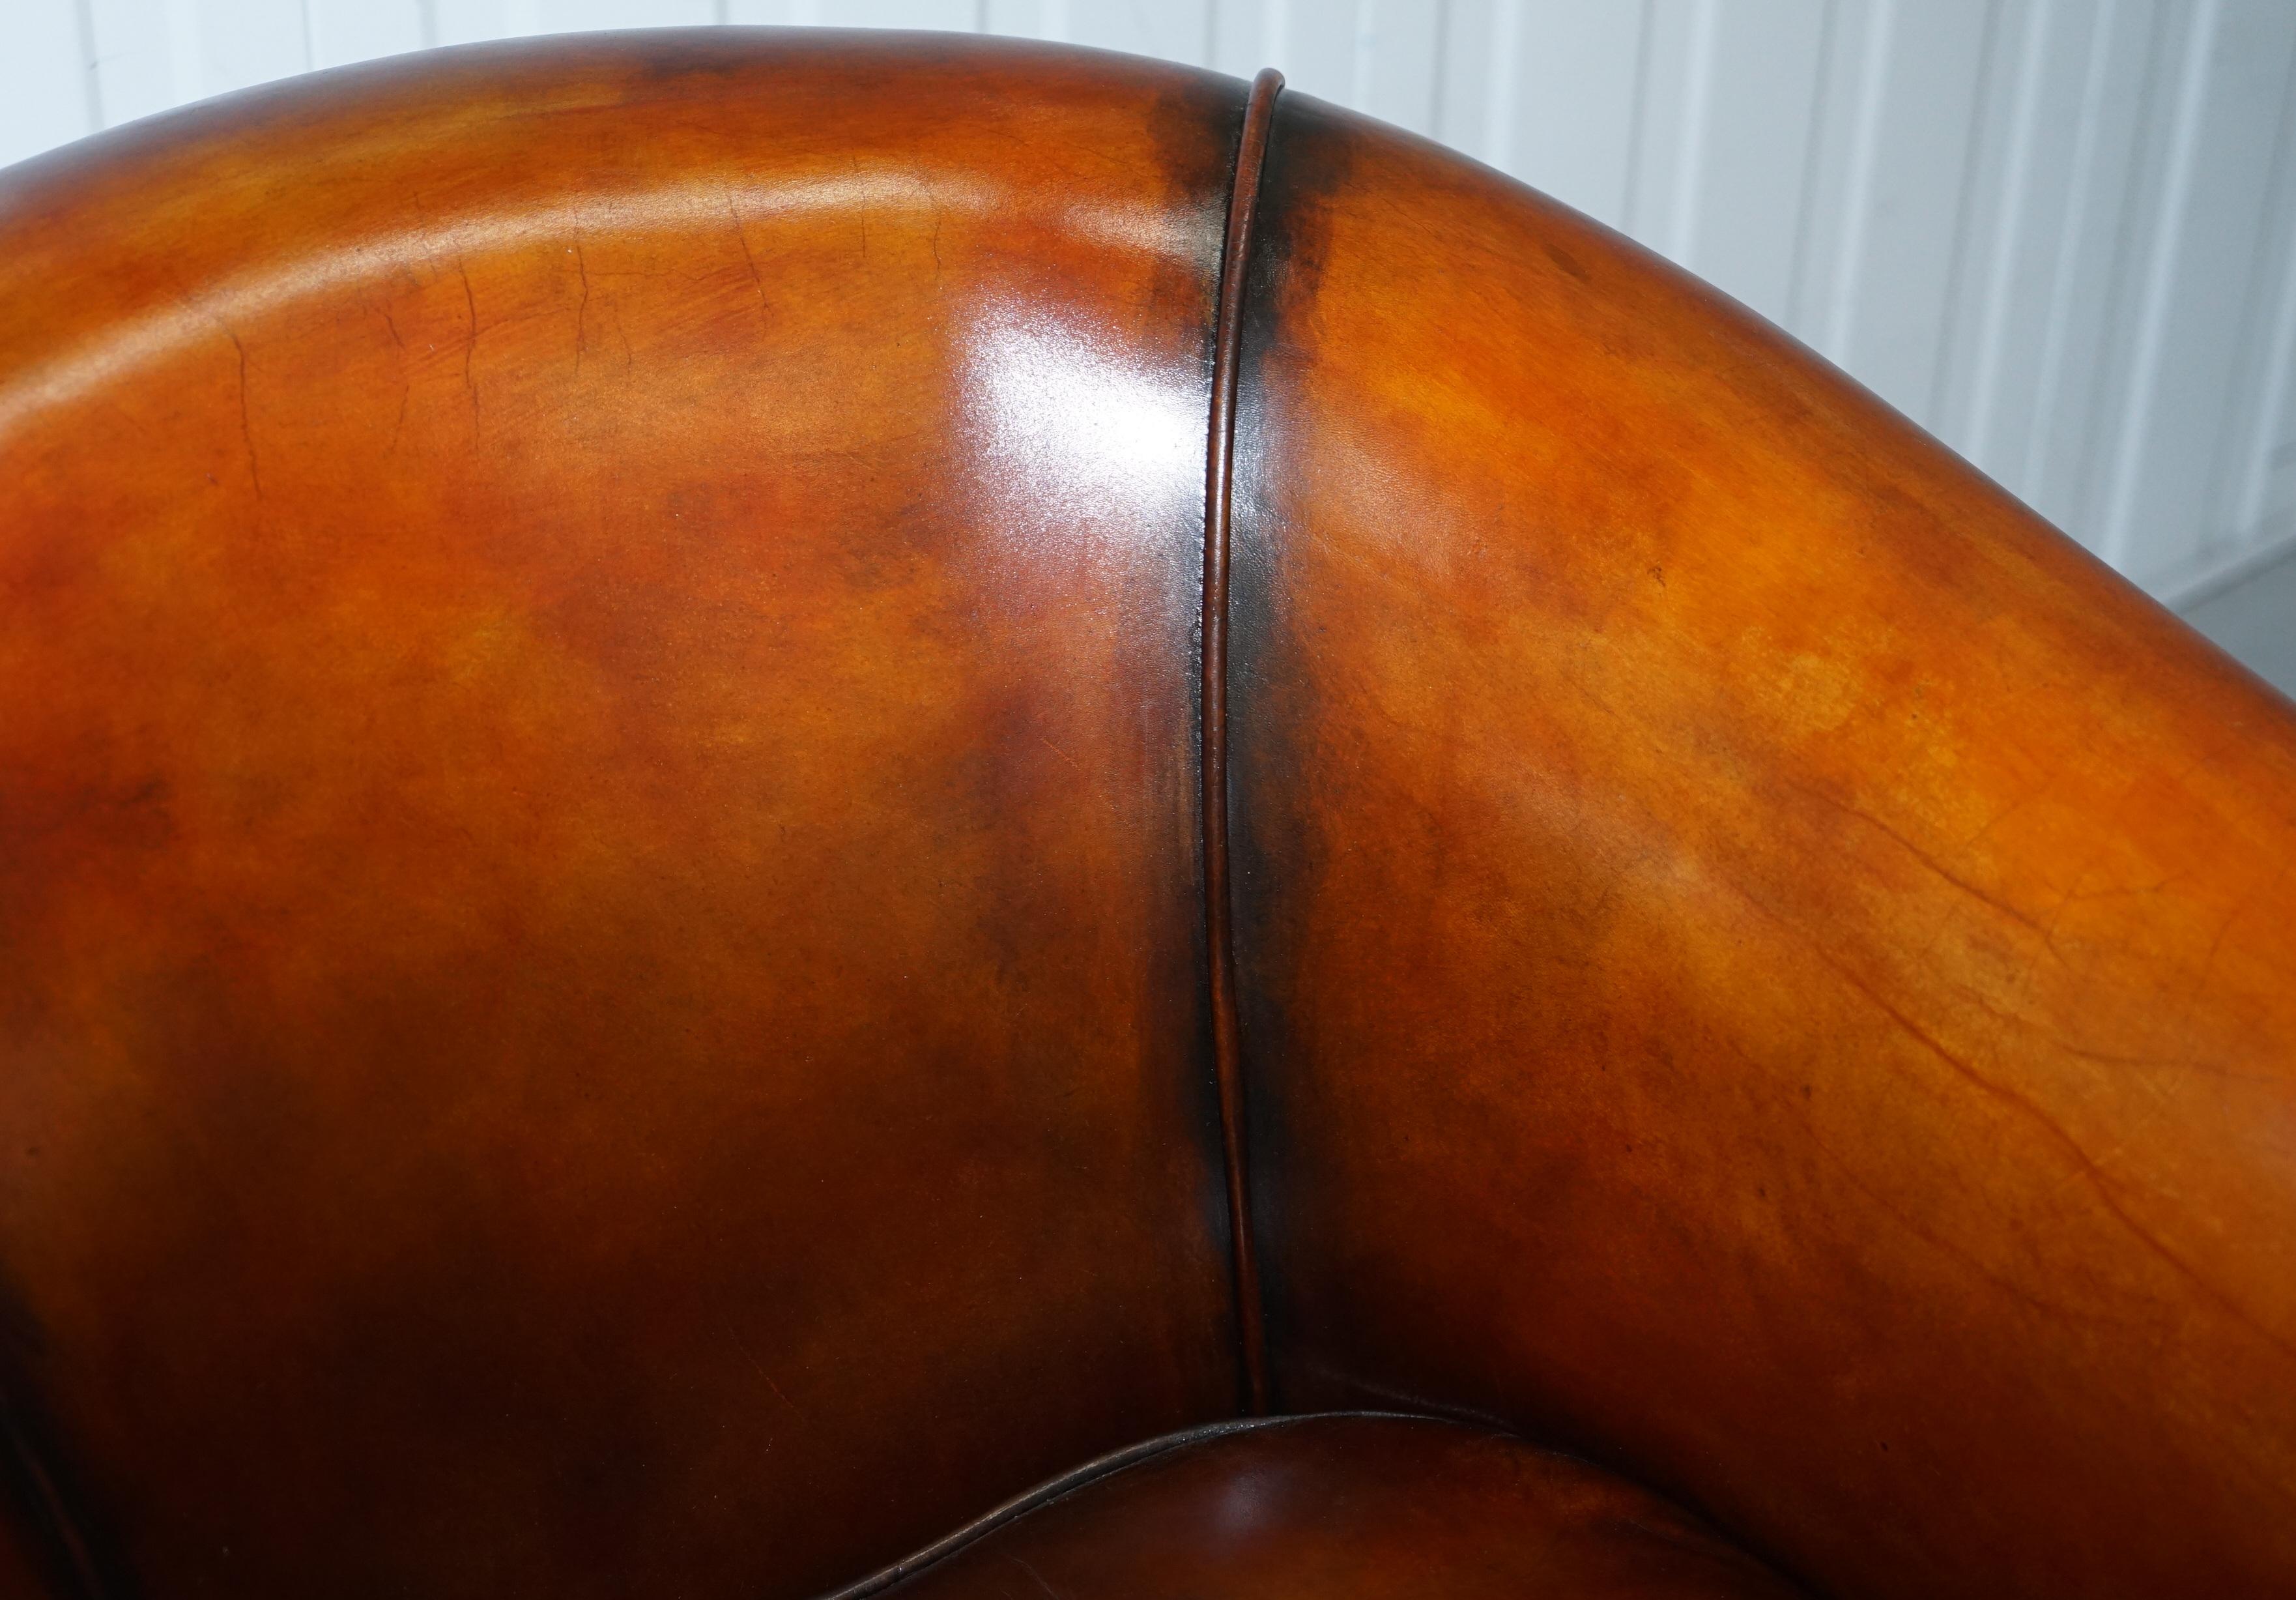 English James Bond 007 Armchair from Spectre Leather Chairs of Bath Fully Restored